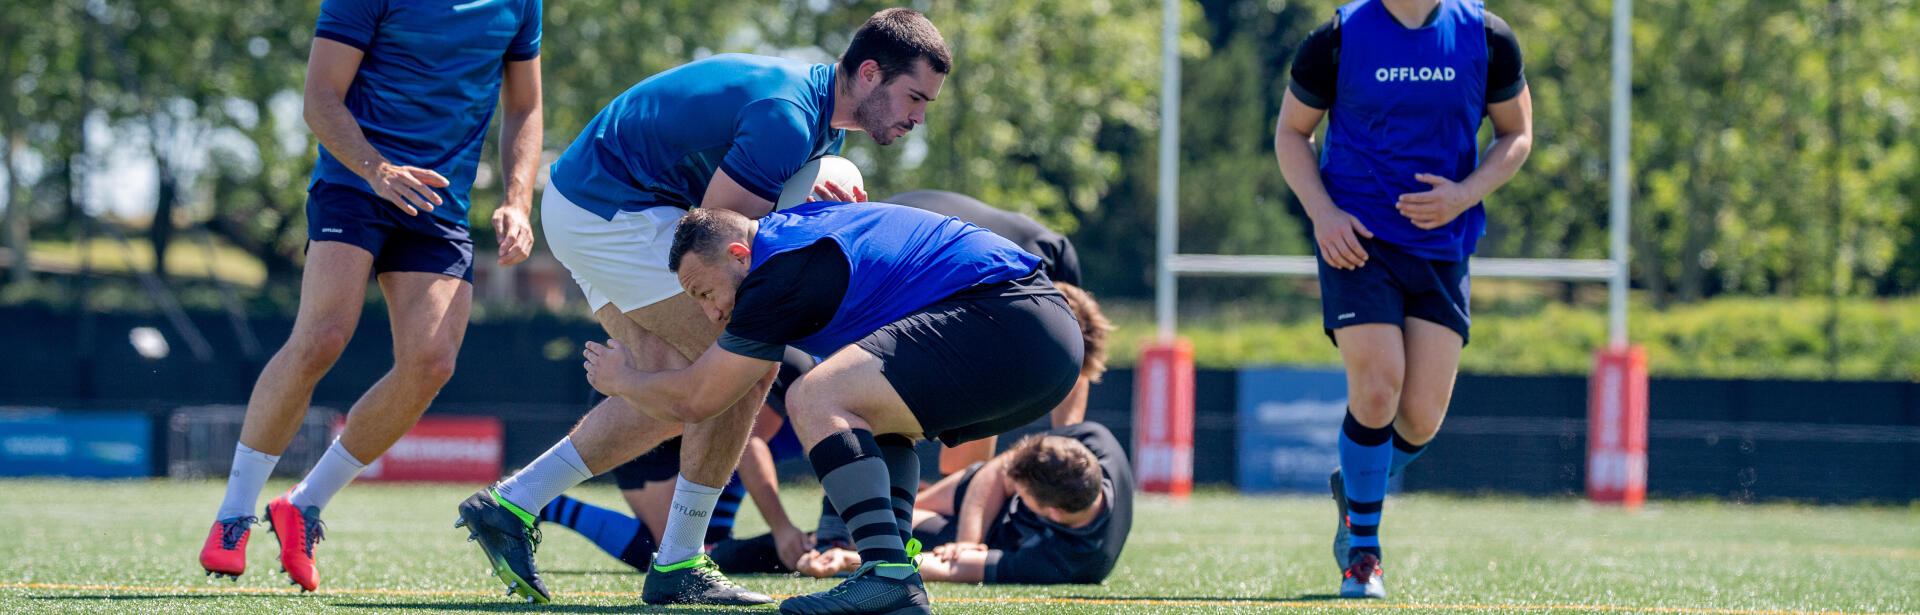 THE TECHNICAL DETAILS AND RULES OF RUGBY